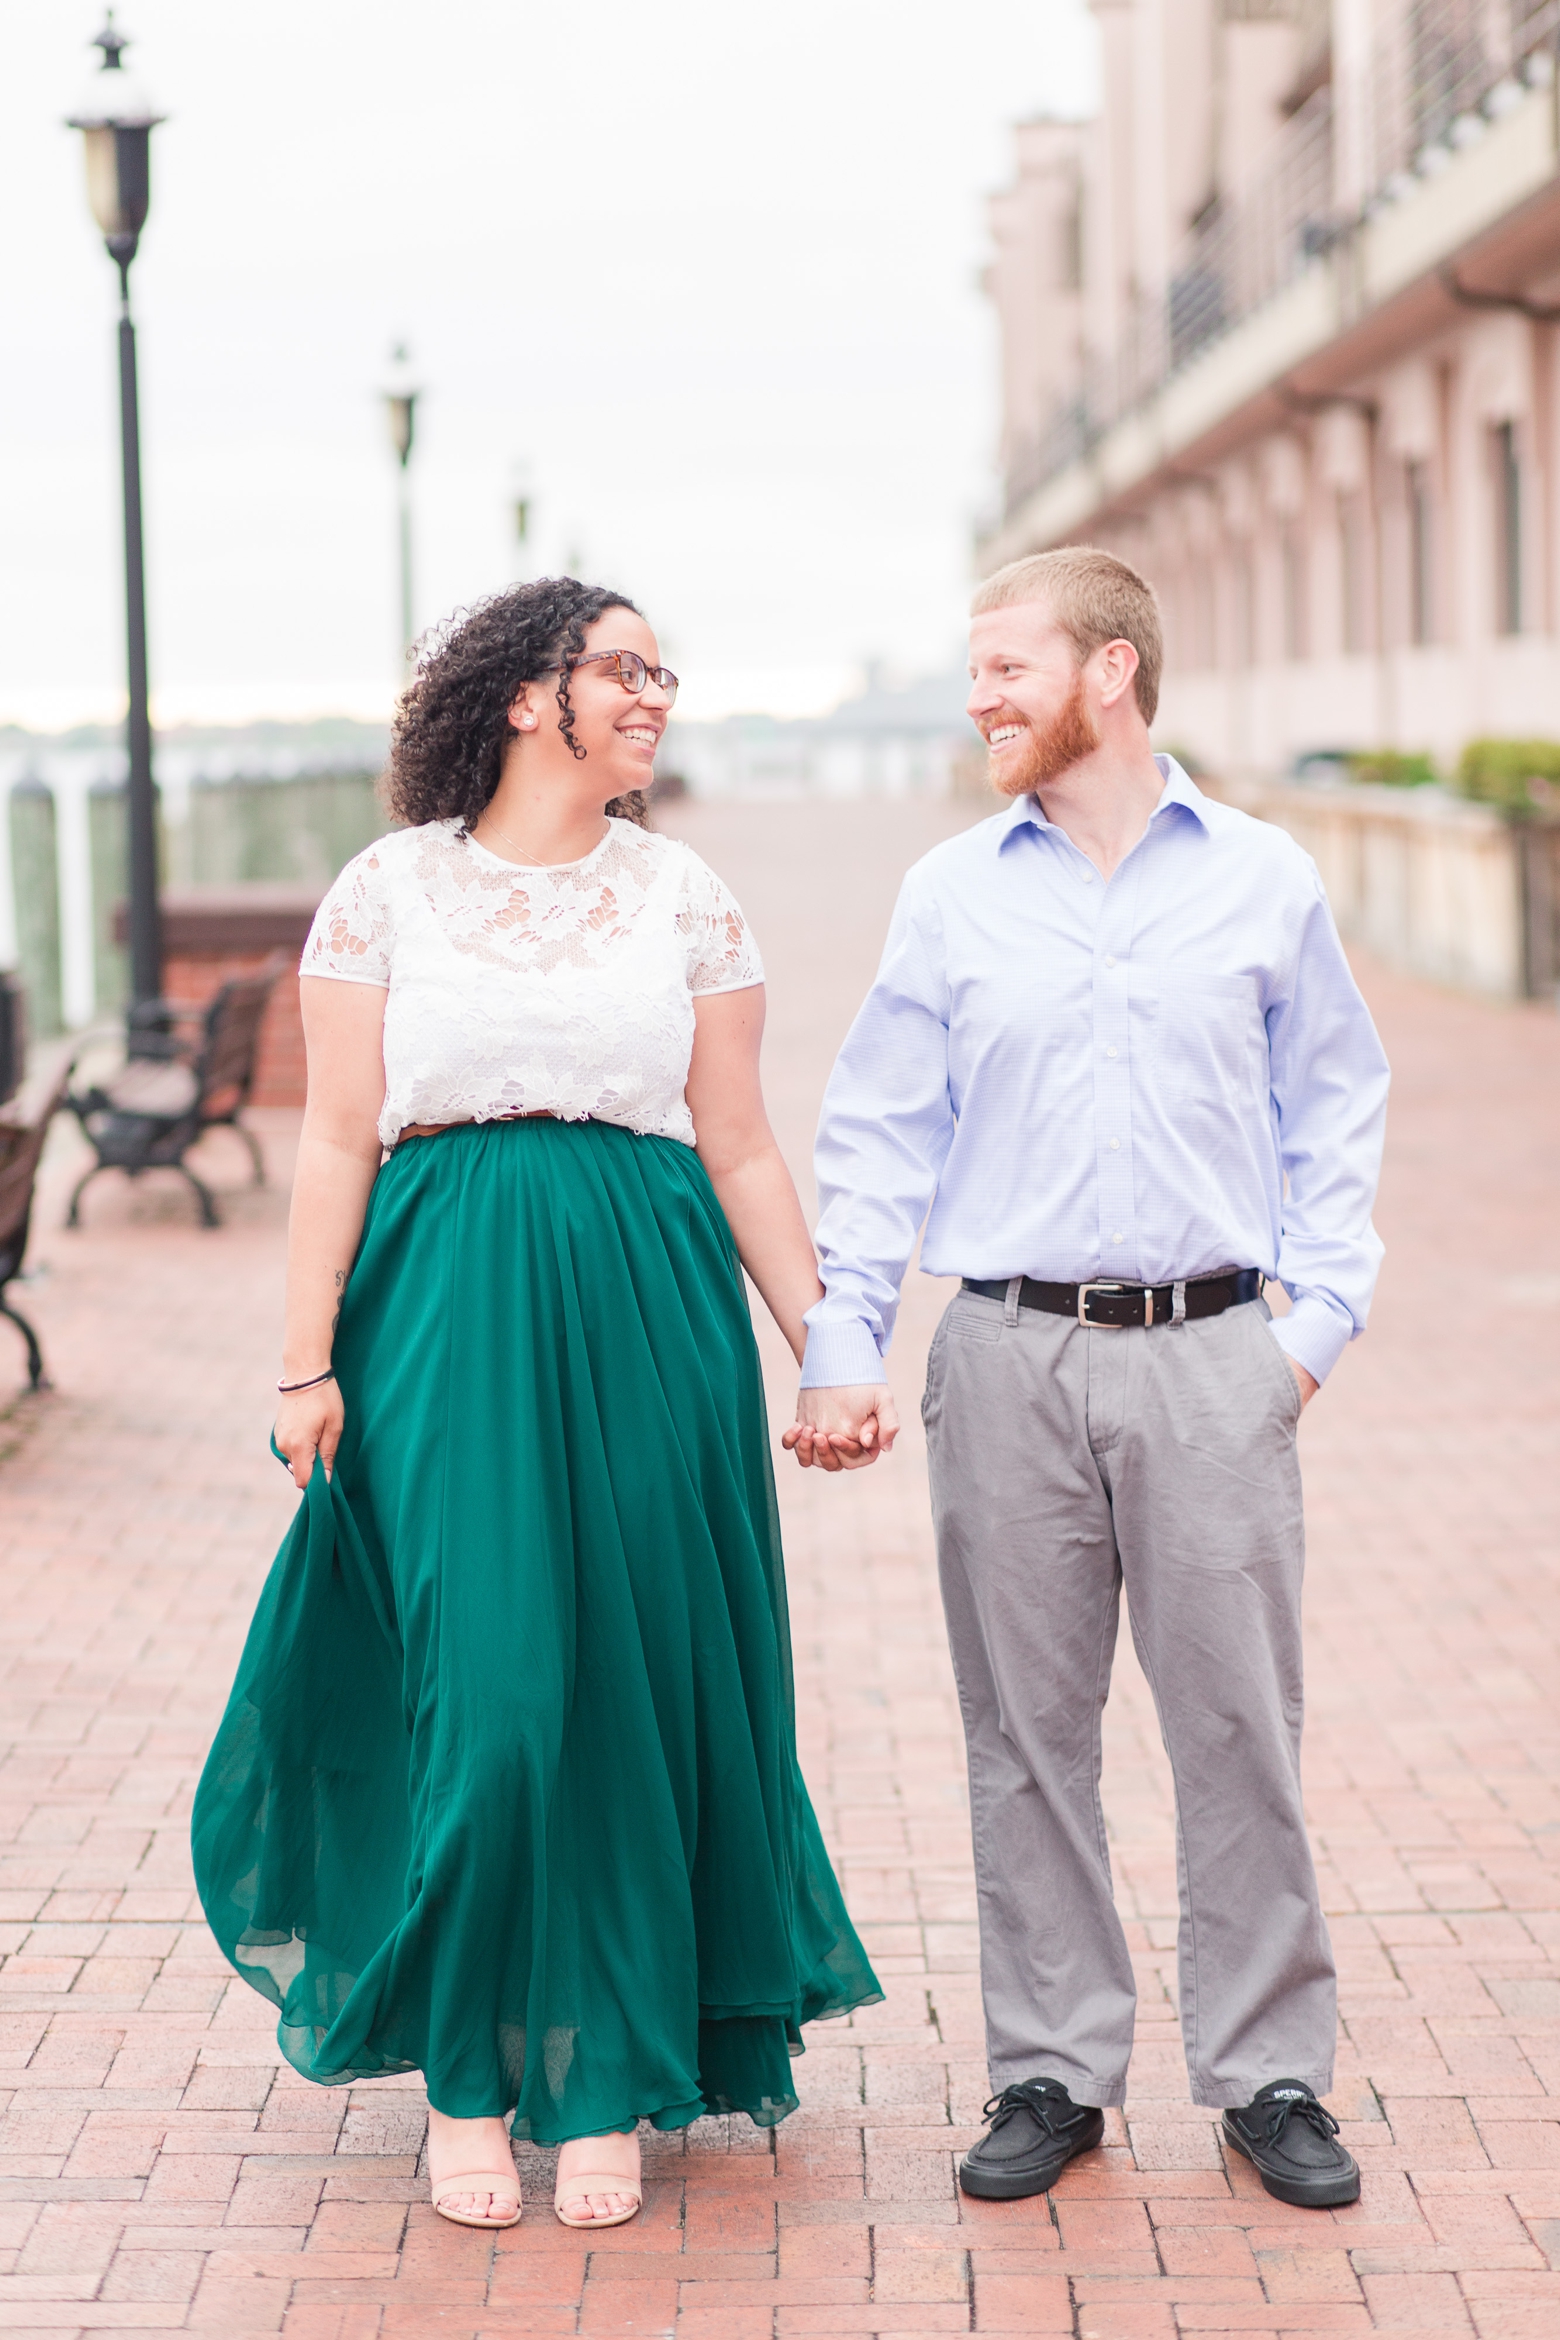 Norfolk Pagoda Engagement Photography by Angie McPherson Photography